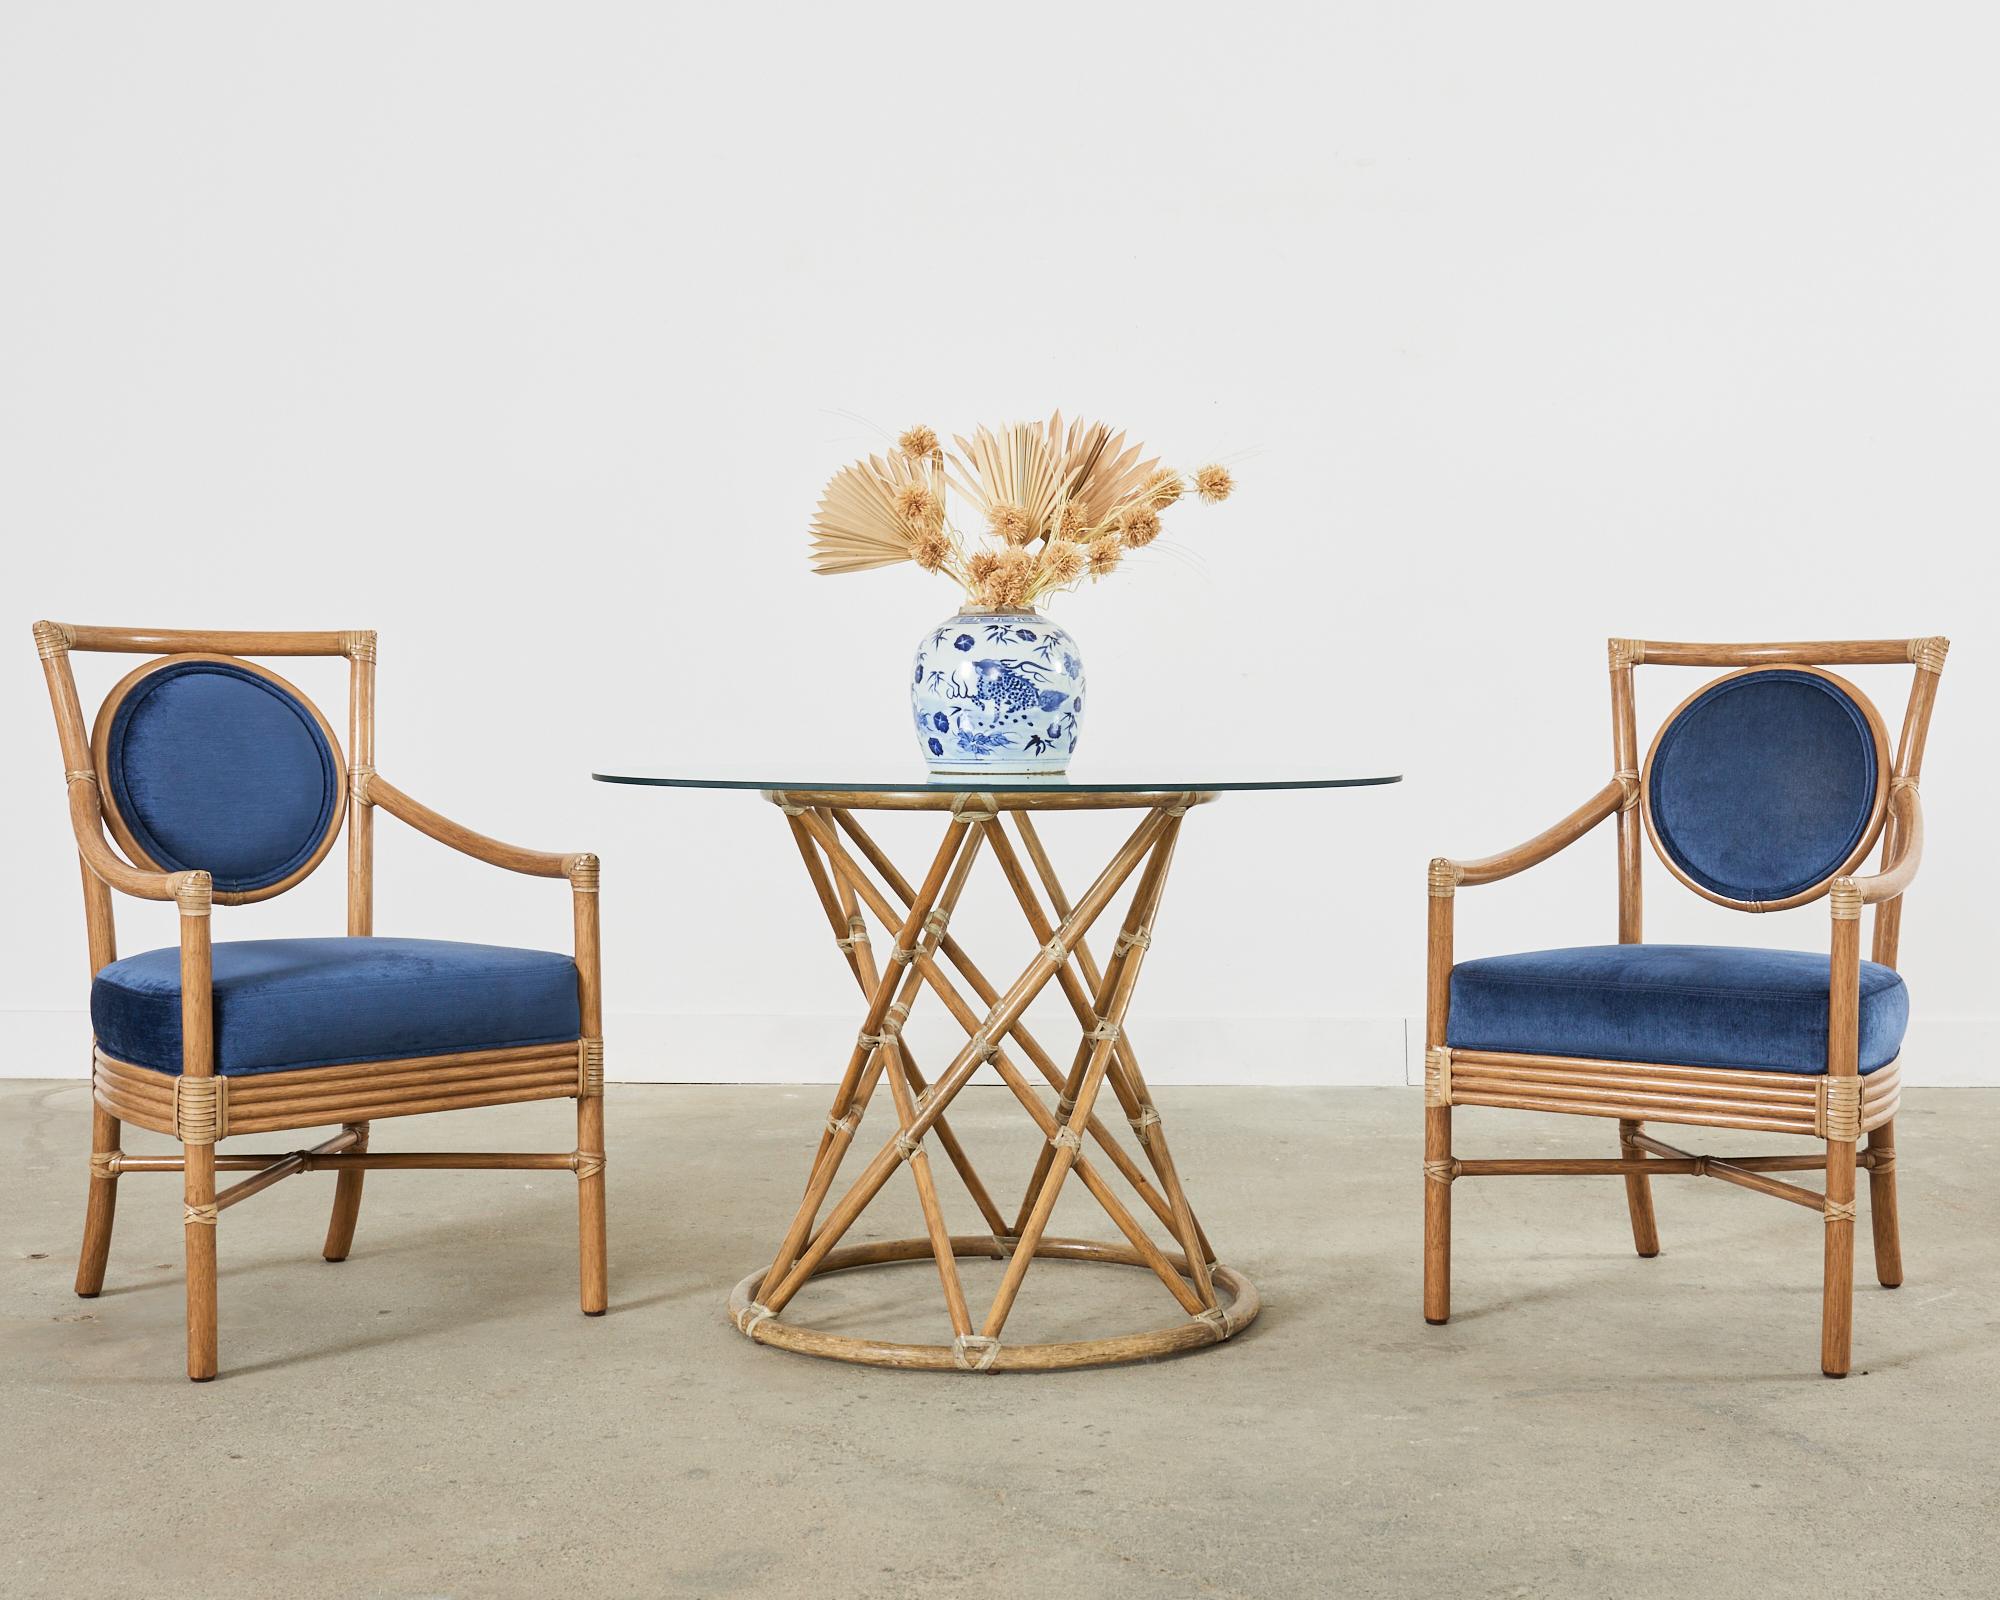 Stately set of six rattan salon armchairs or dining chairs ( Model # MCM222B) made in the coastal organic modern style by McGuire. These rare chairs were designed by Orlando Diaz-Azcuy and feature an imposing square pole rattan frame contrasted by a